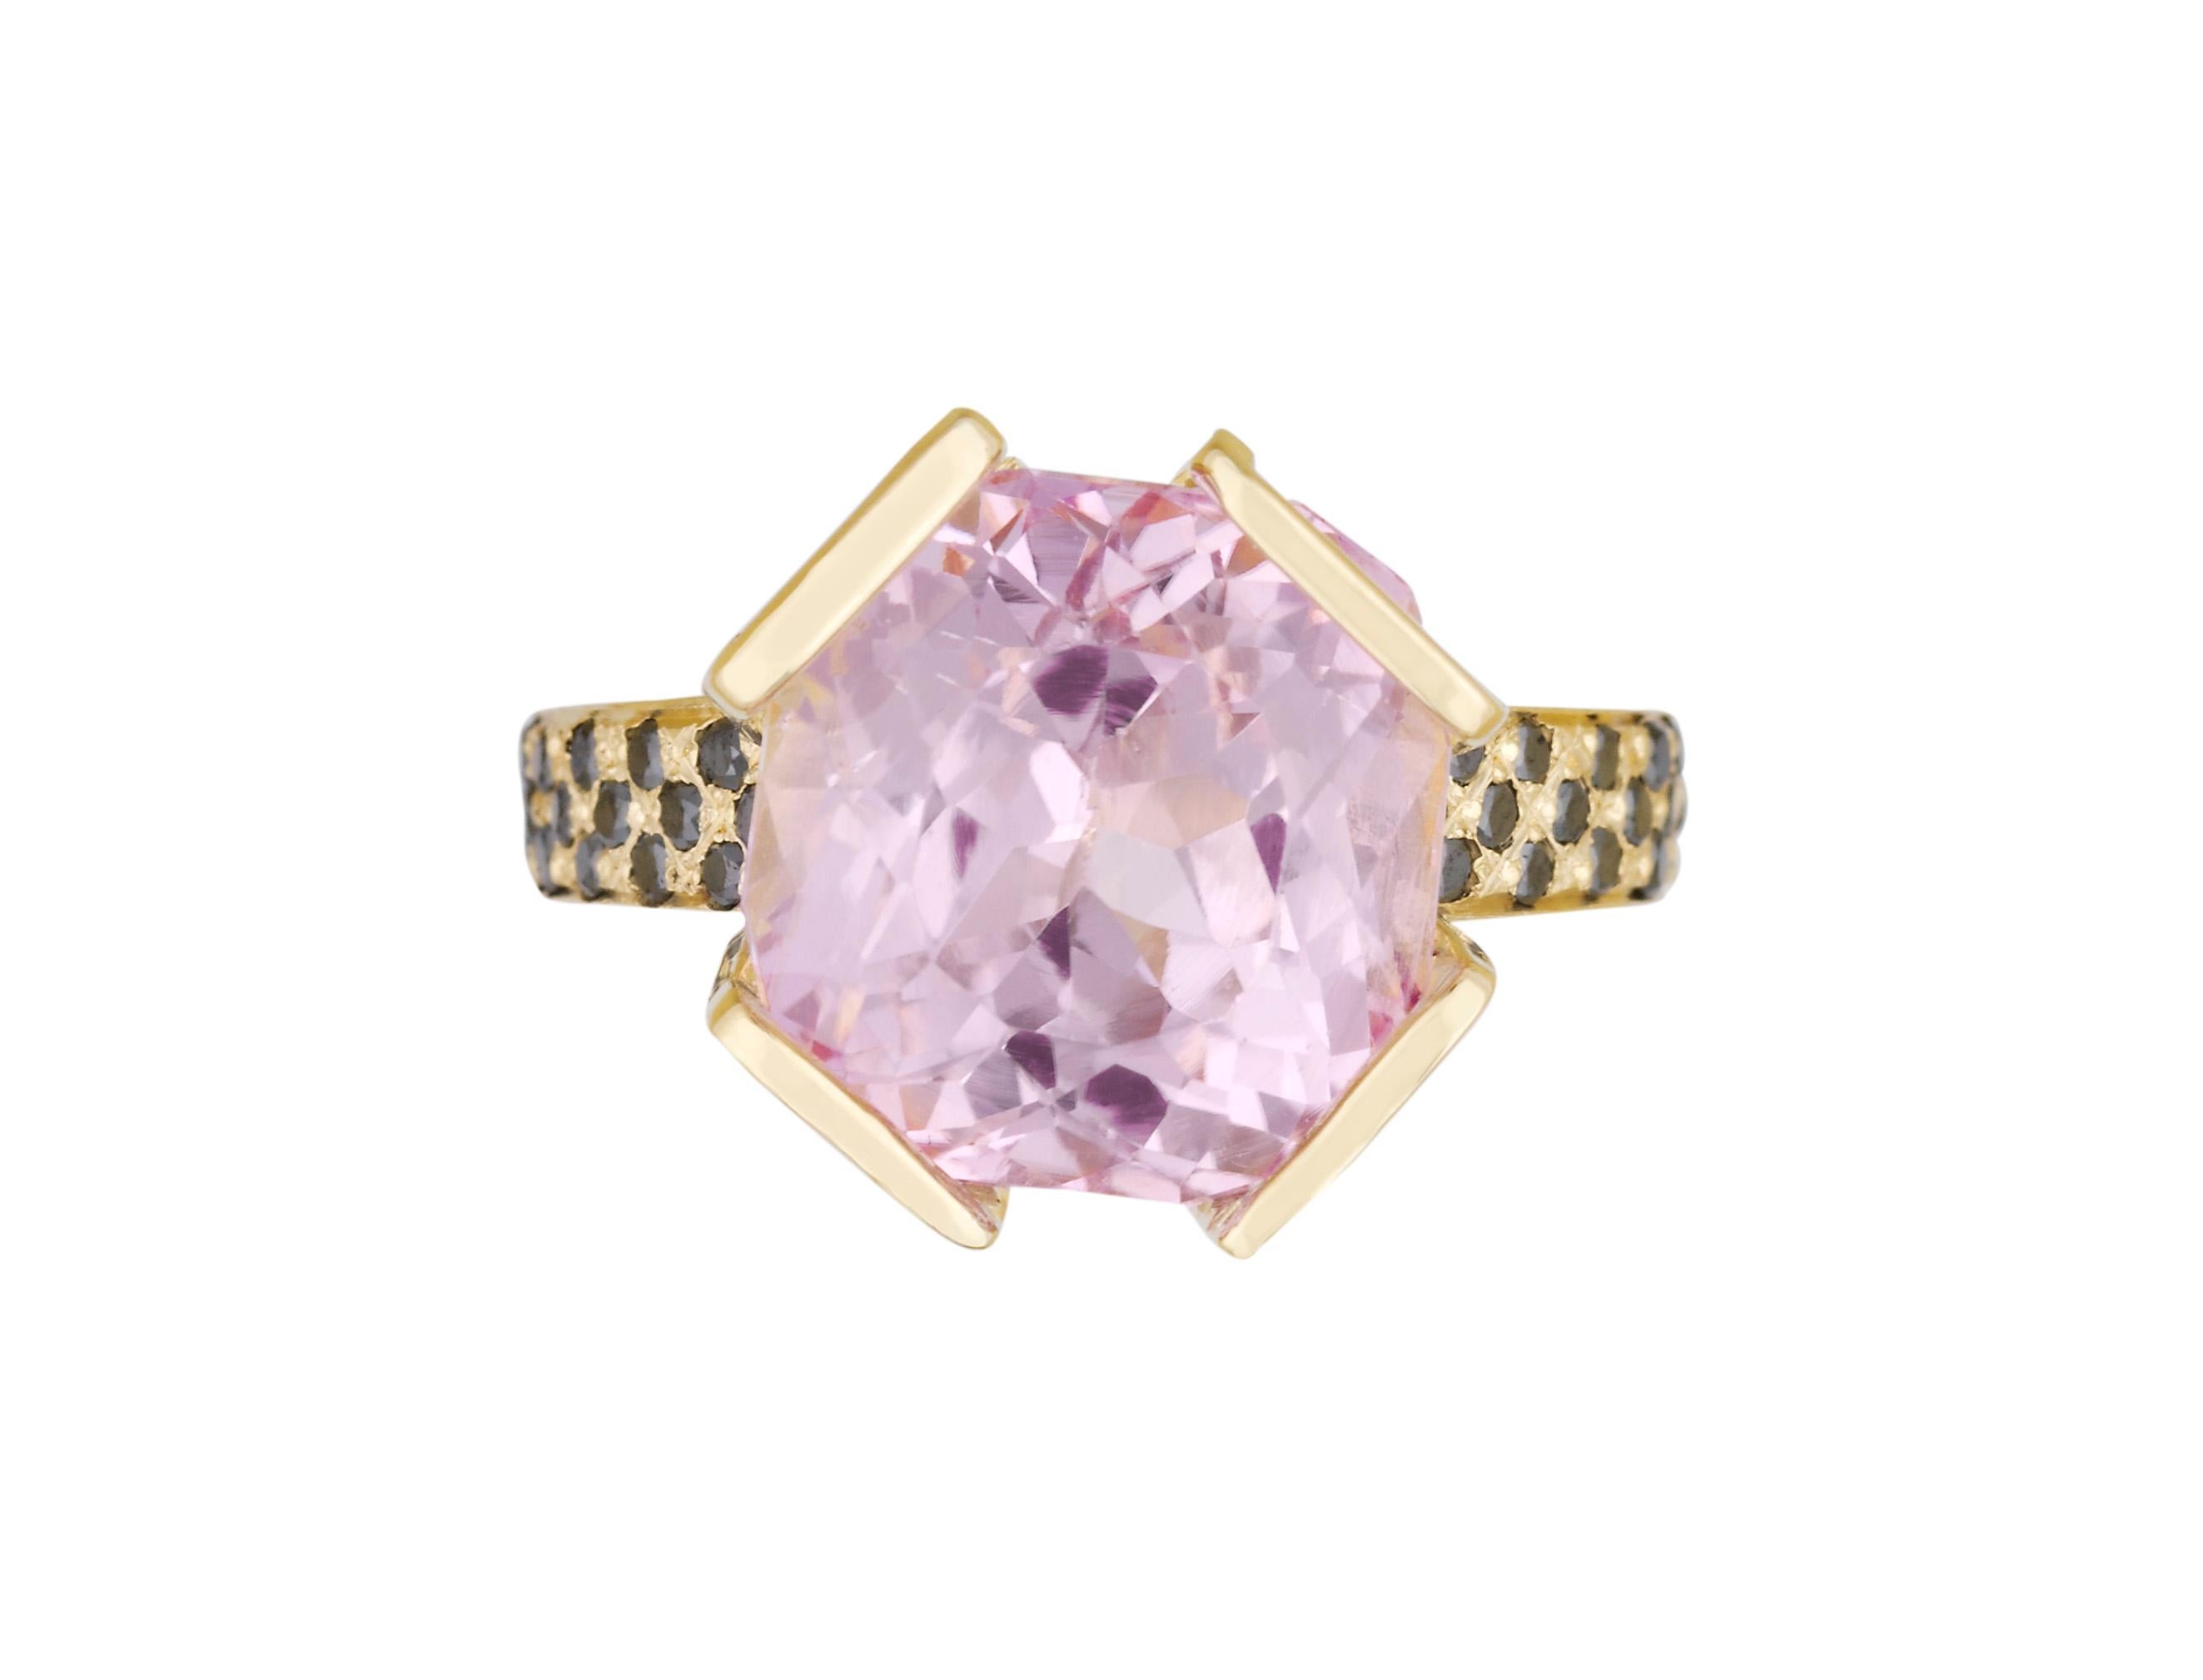 This feminine British-London Hallmarked 18 karat yellow gold ring, set with highest quality of black diamonds and natural kunzite is from MAIKO NAGAYAMA's Haute Couture Collection called 